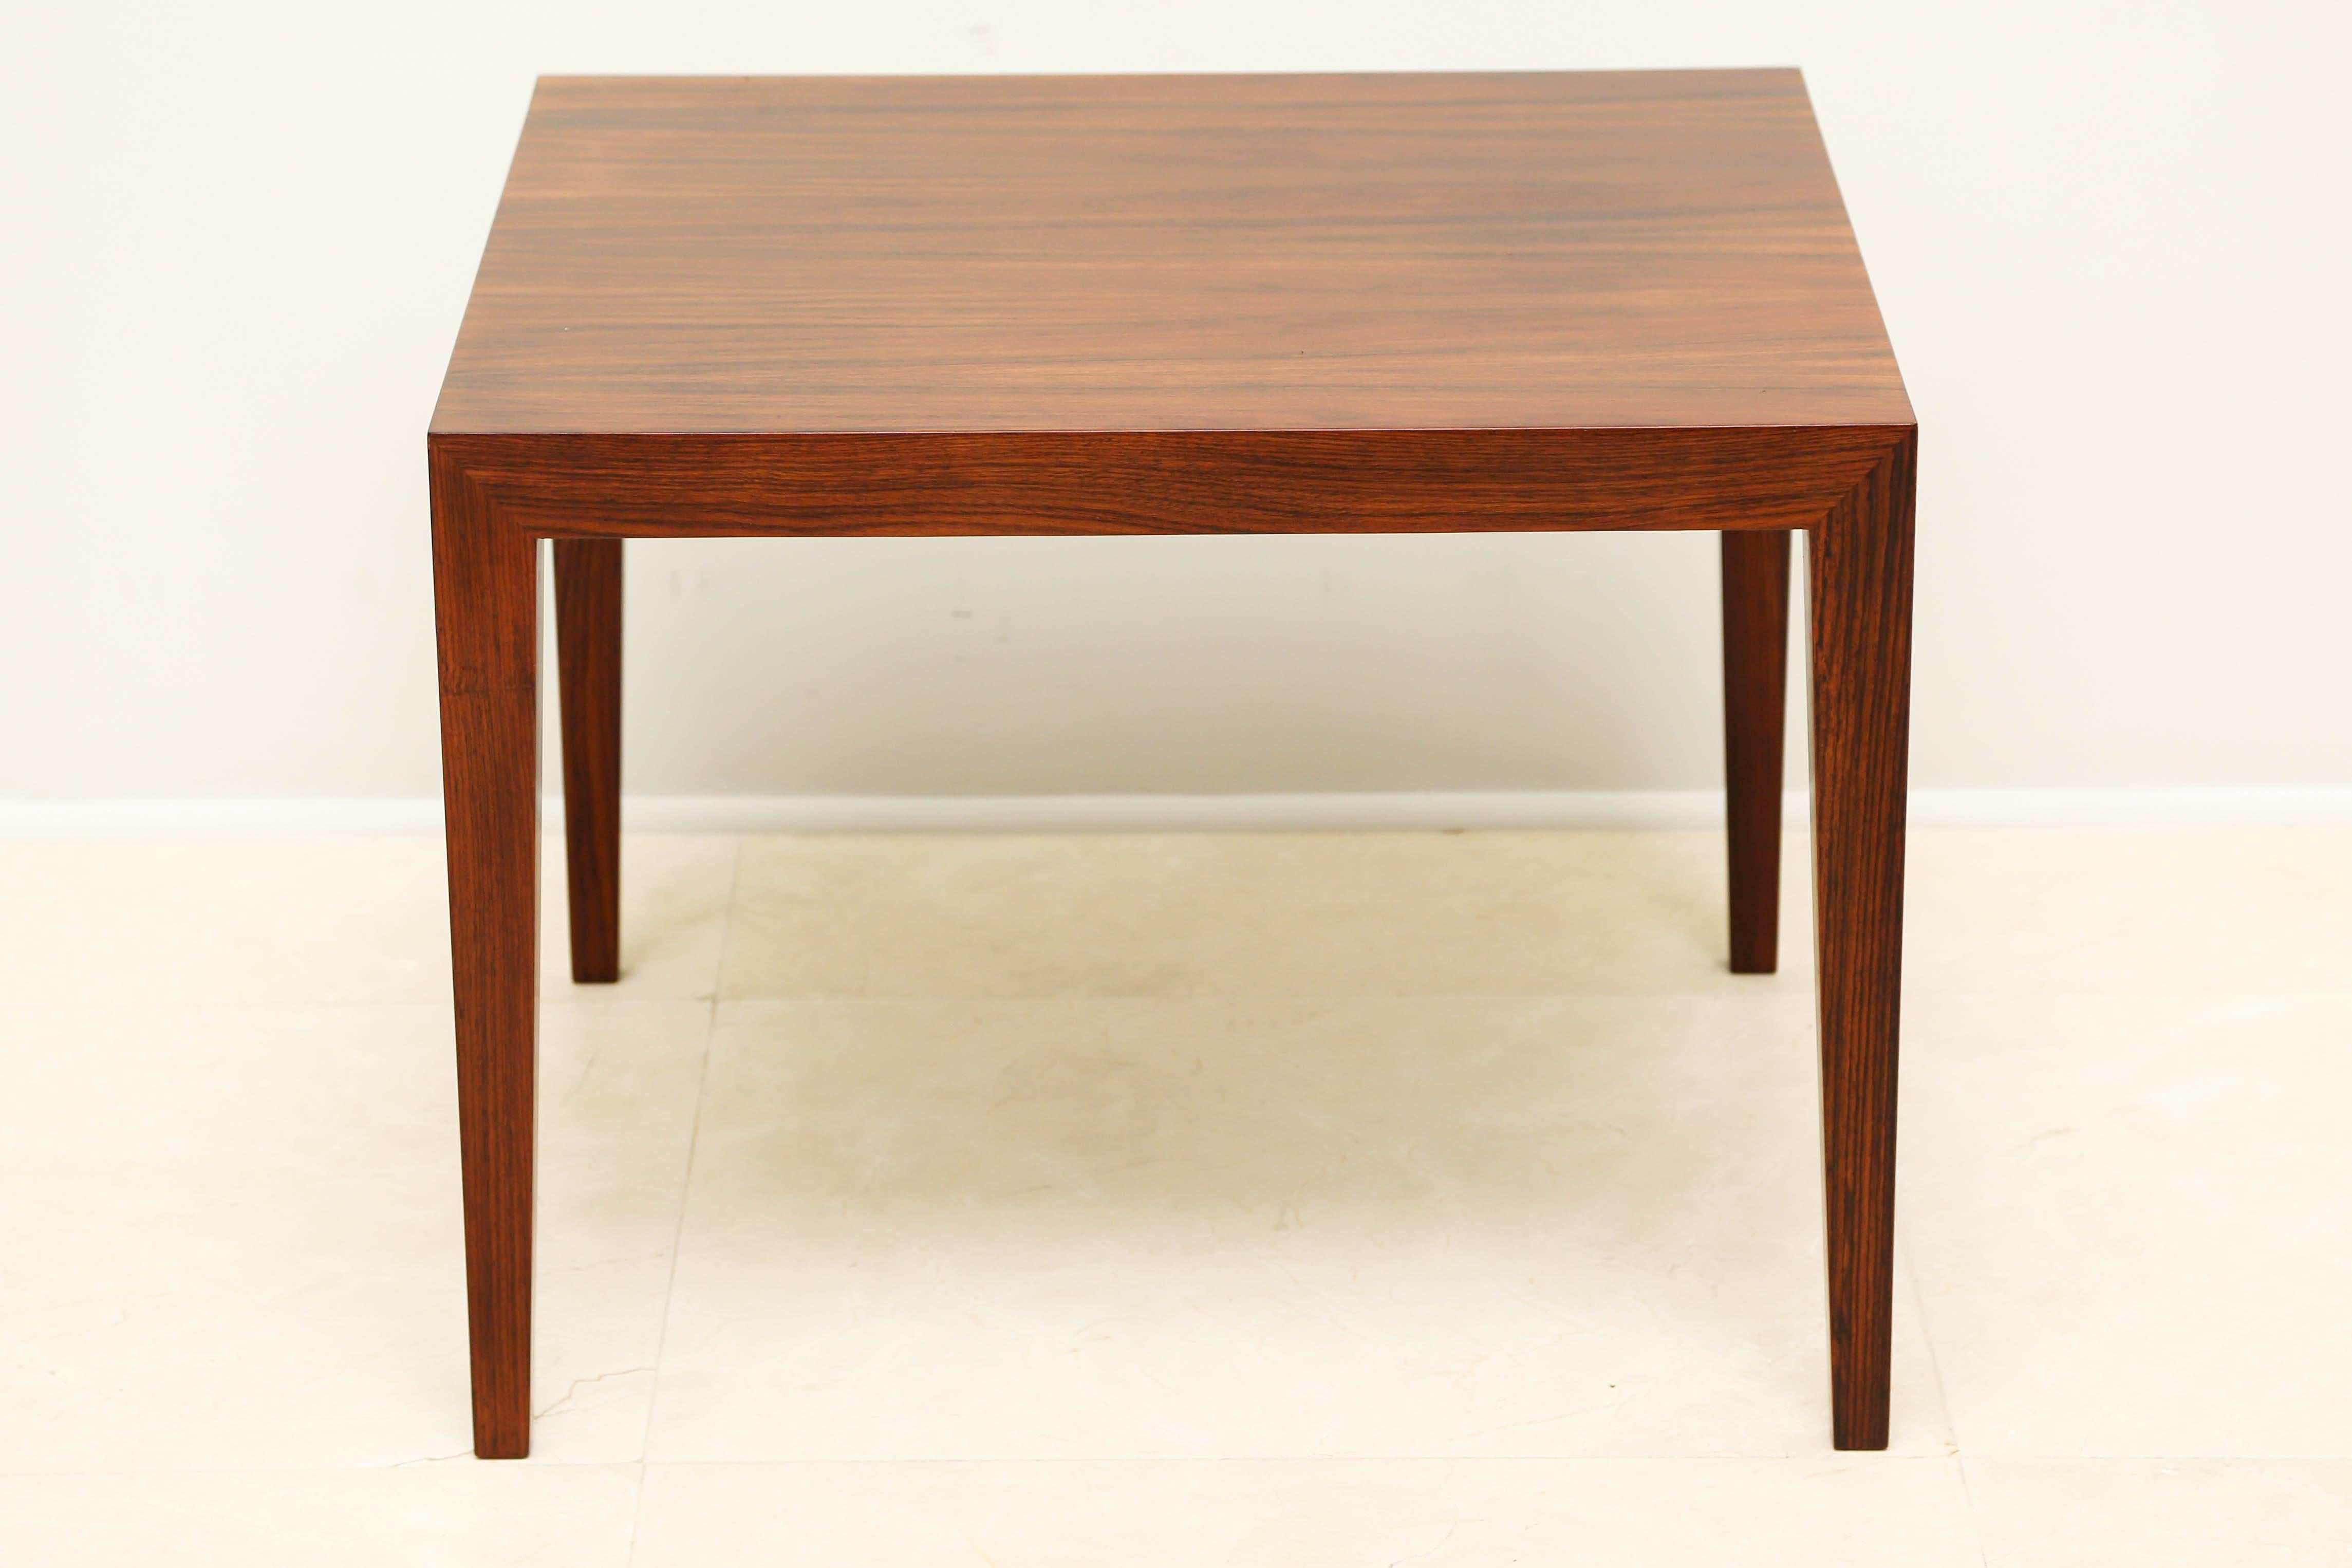 Rosewood side/end table from Denmark.